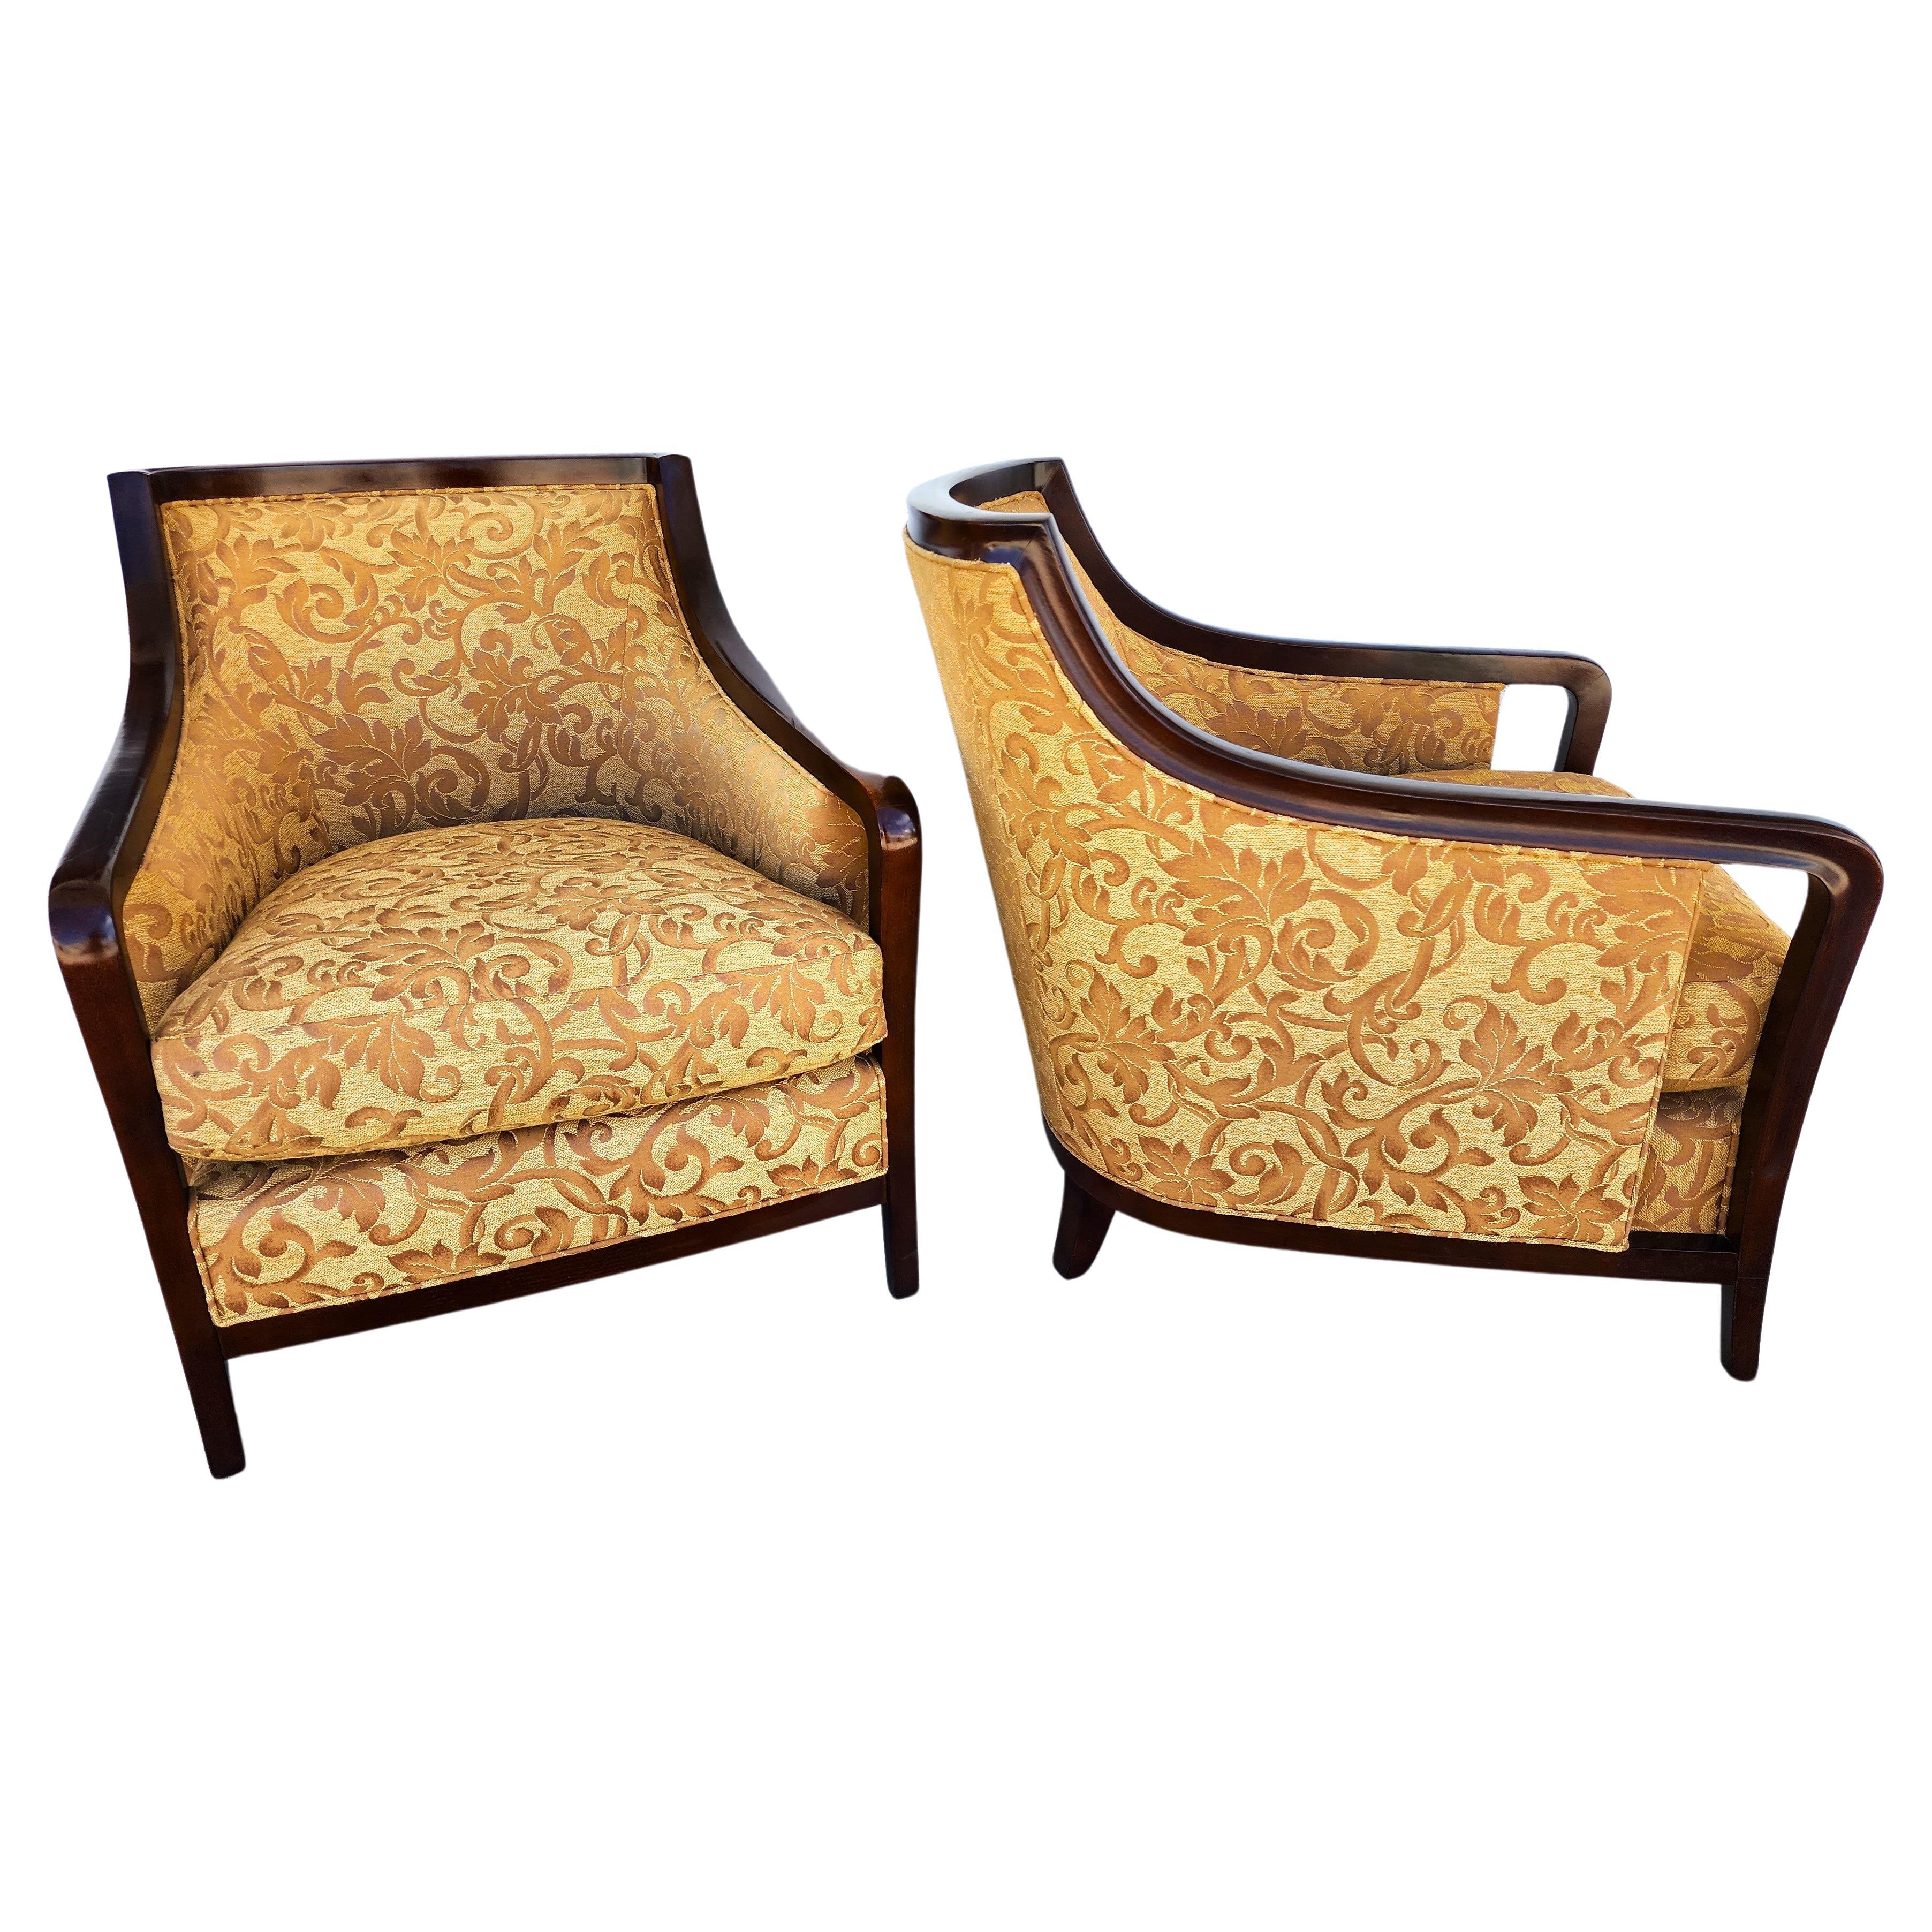 Barbara Barry for Baker Salon Lounge Chairs